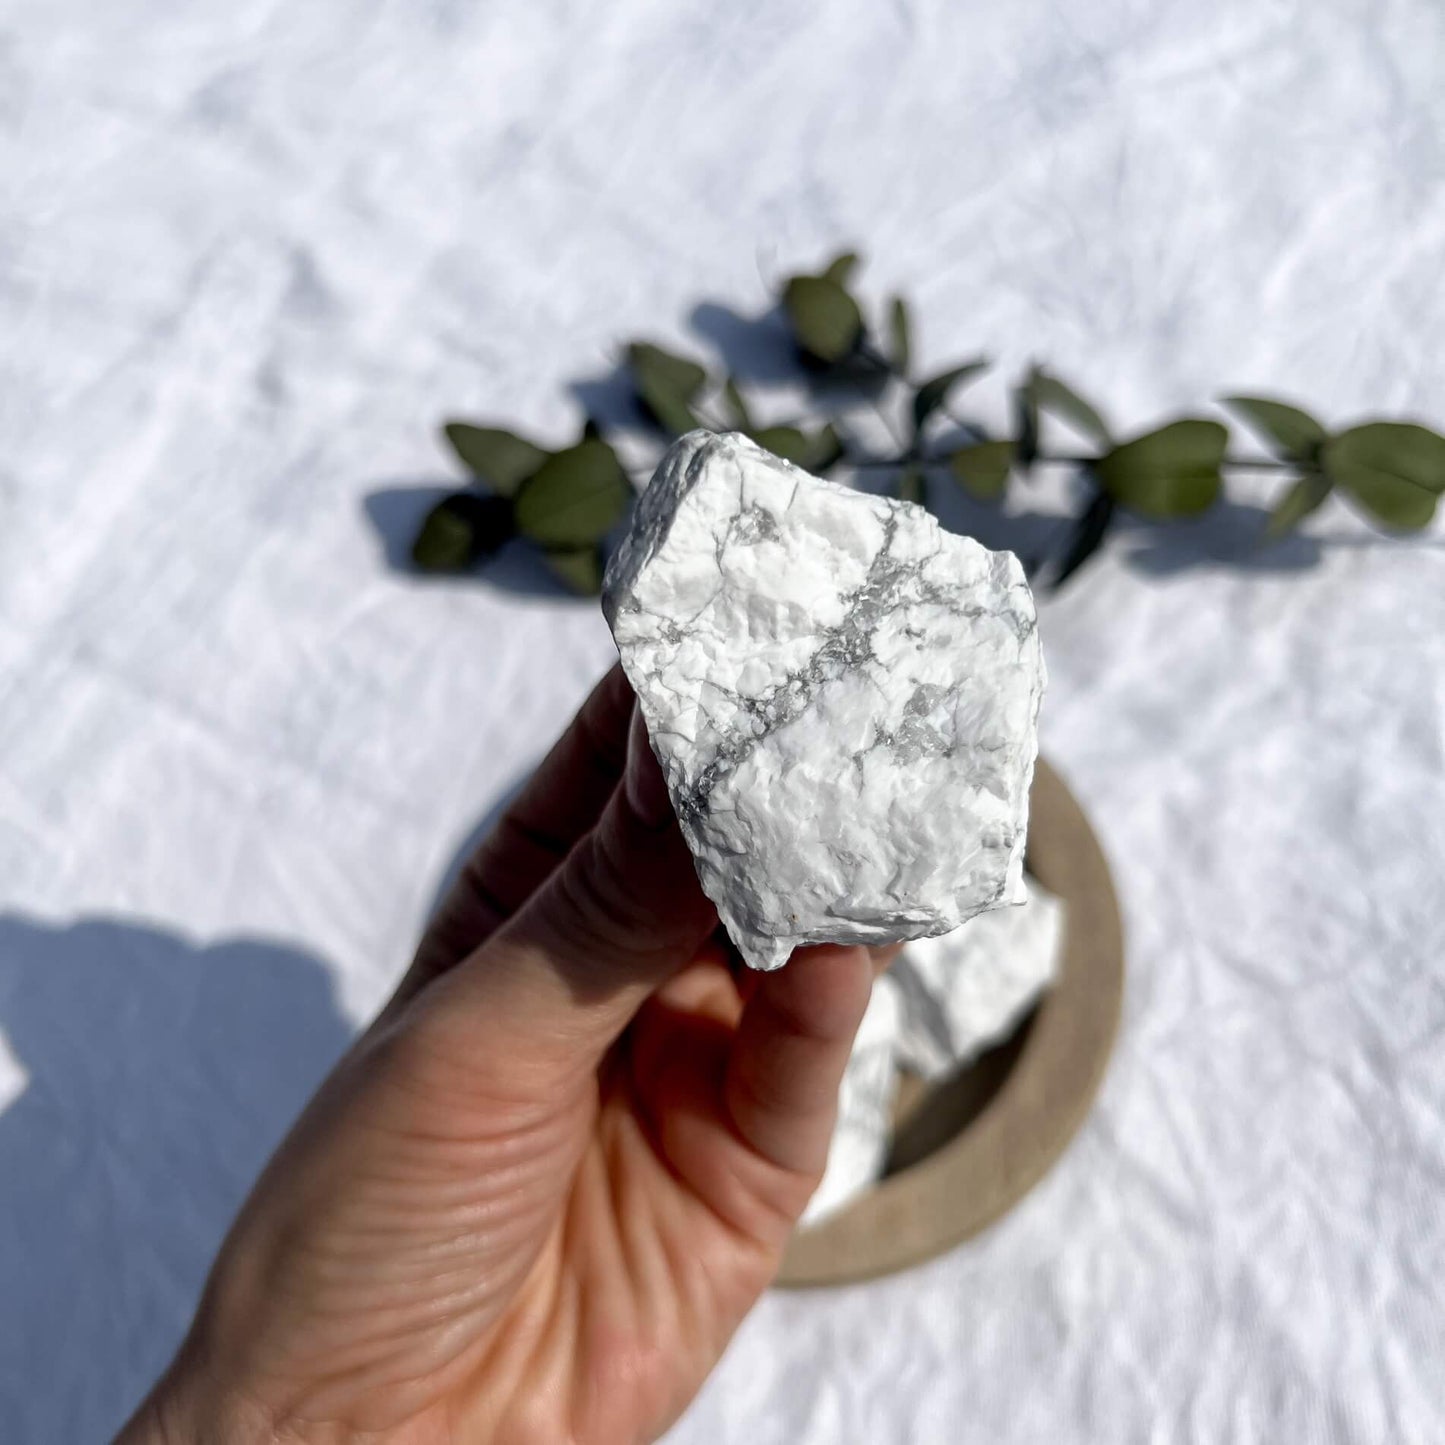 A white and grey marbled howlite crystal piece is held to camera to show a silvery streak running through the crystal